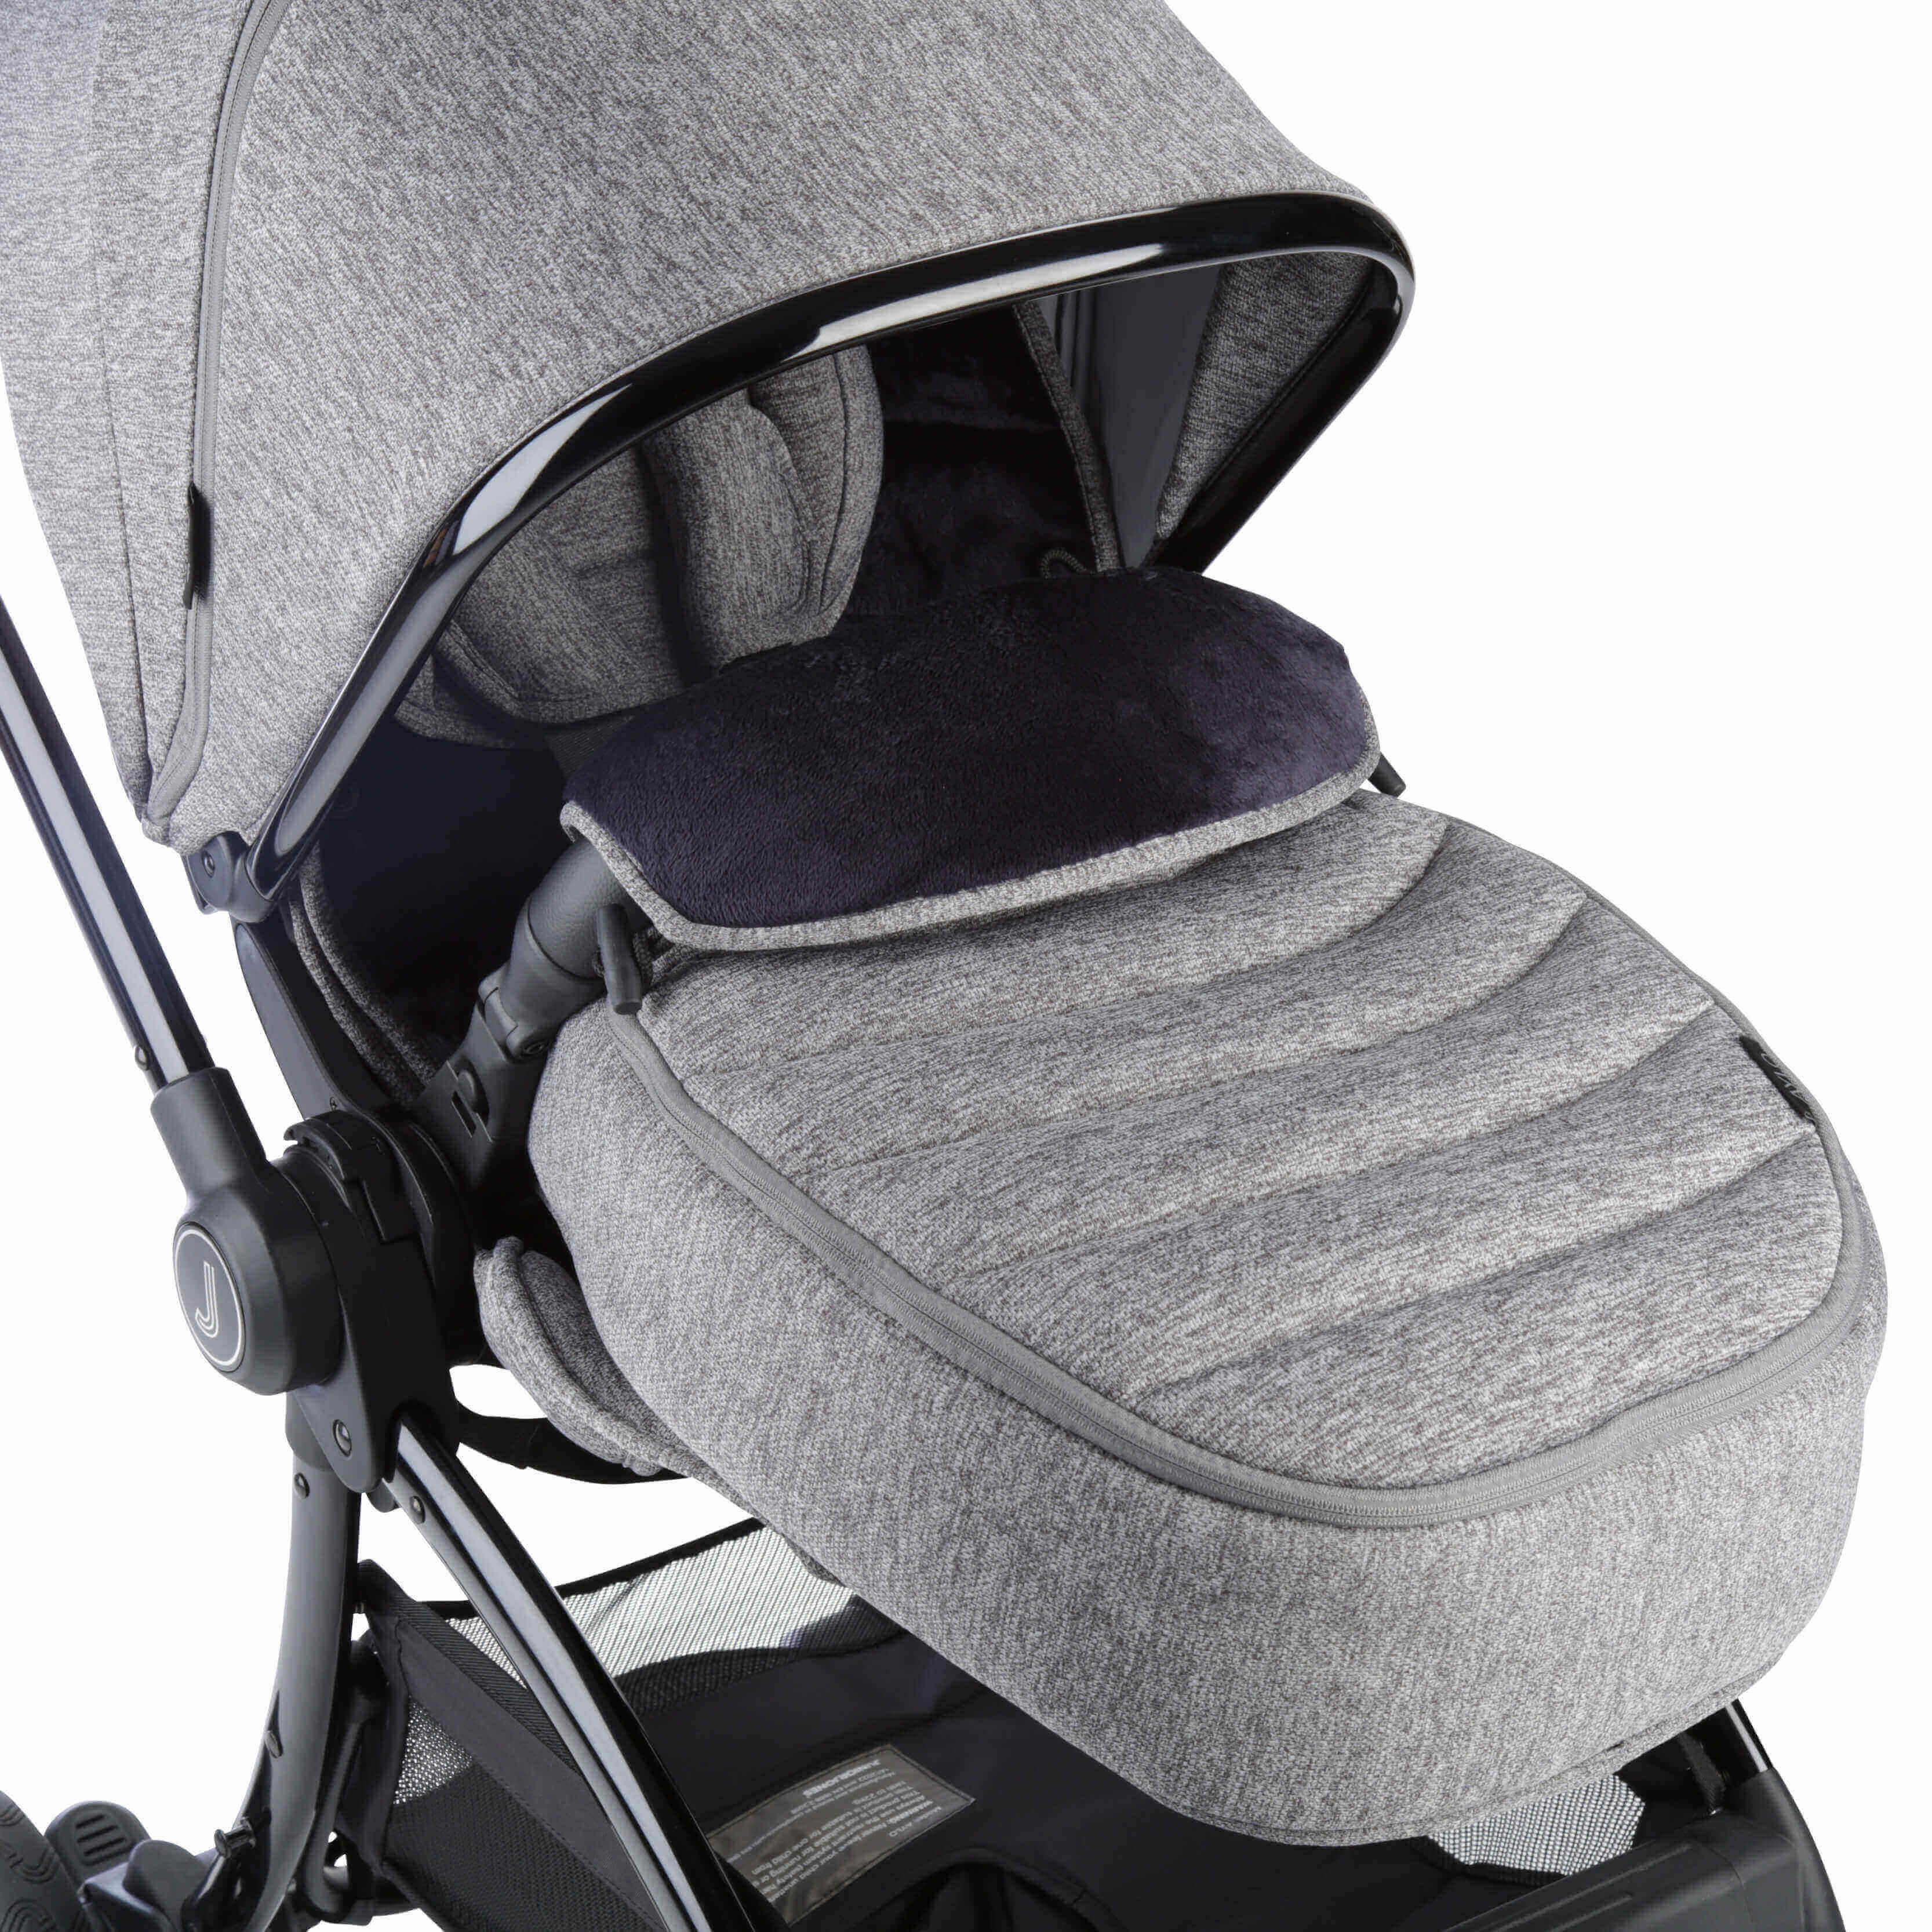 Junior Jones Aylo Grey Marl 11pc Travel System inc Doona Flame Red Car Seat -  | For Your Little One